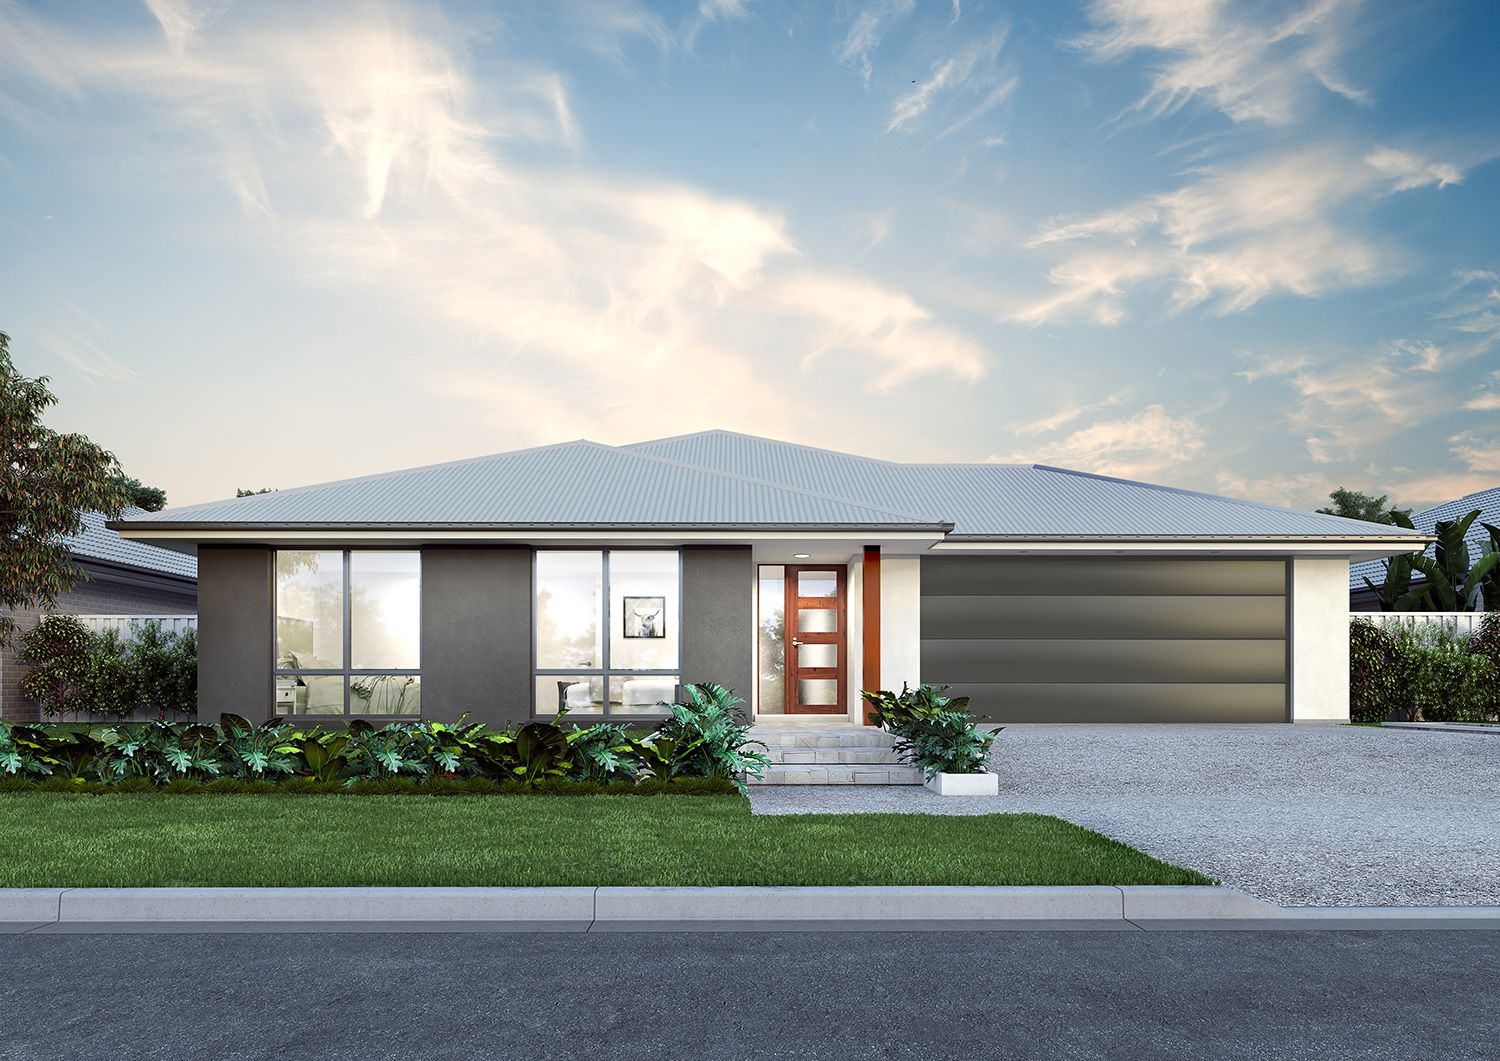 4 bedrooms New House & Land in Lot 1302, 21 Oak Street CLIFTLEIGH NSW, 2321